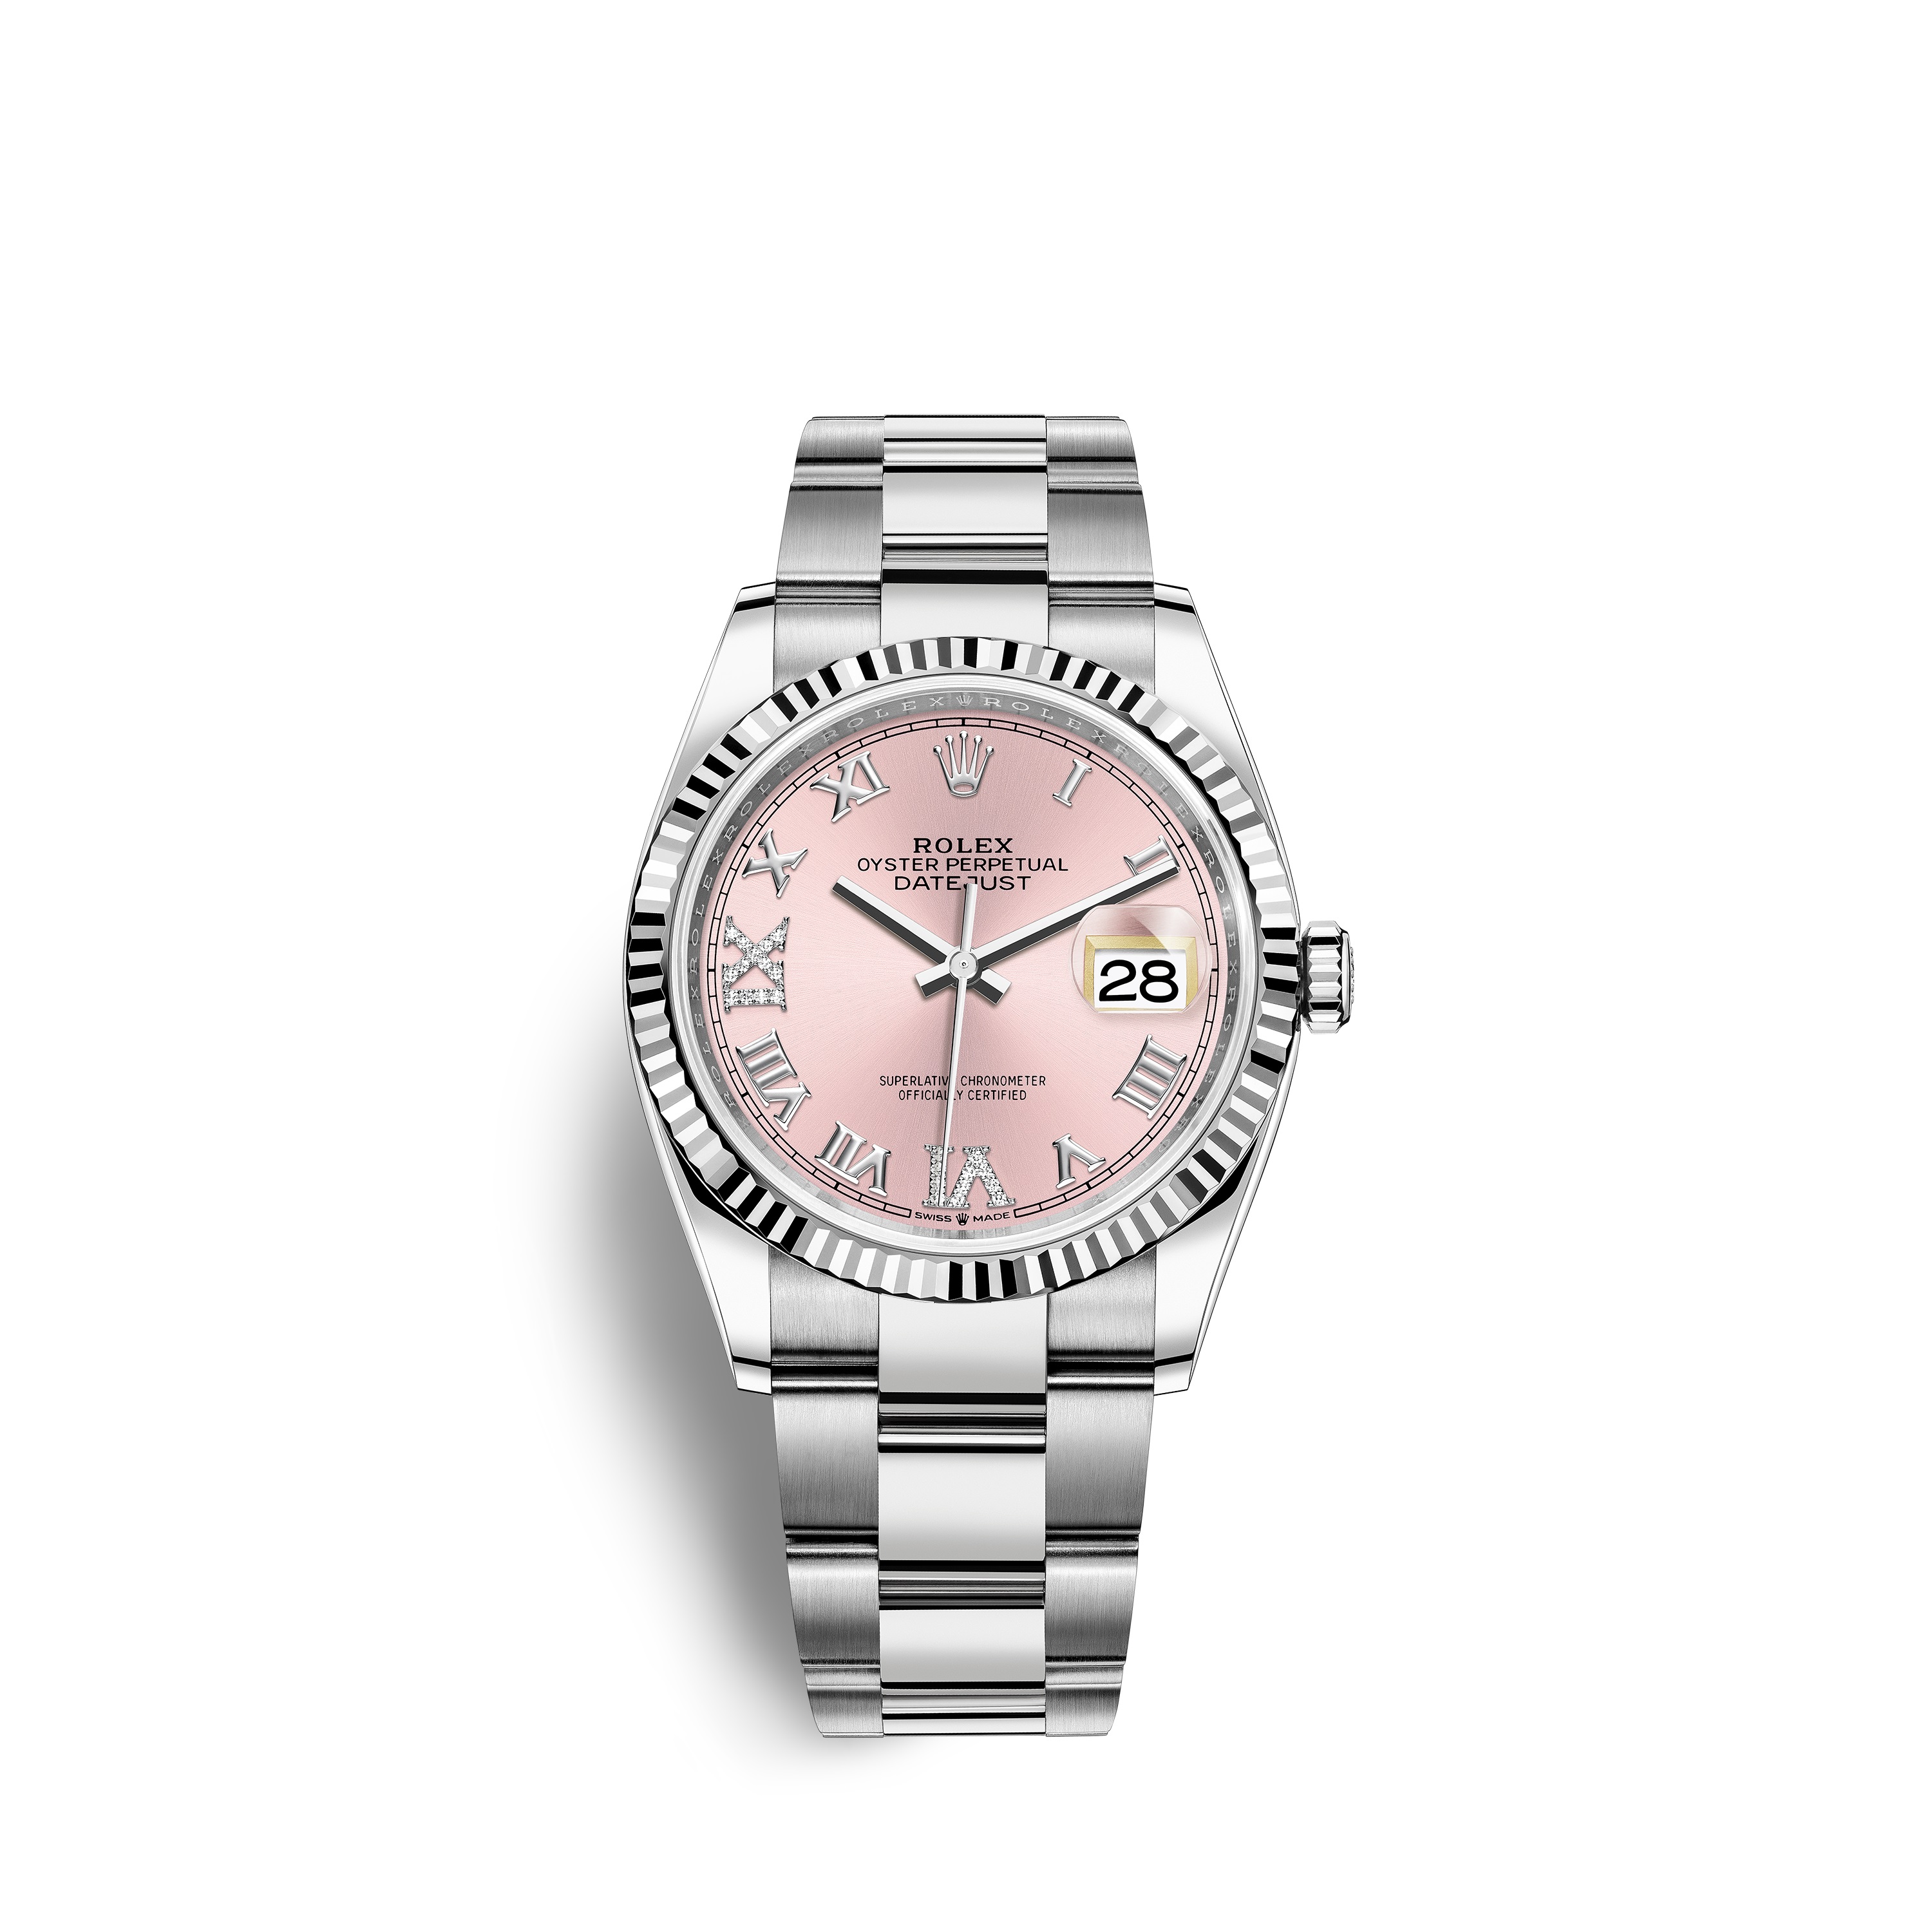 Datejust 36 126234 White Gold & Stainless Steel Watch (Pink Set with Diamonds)